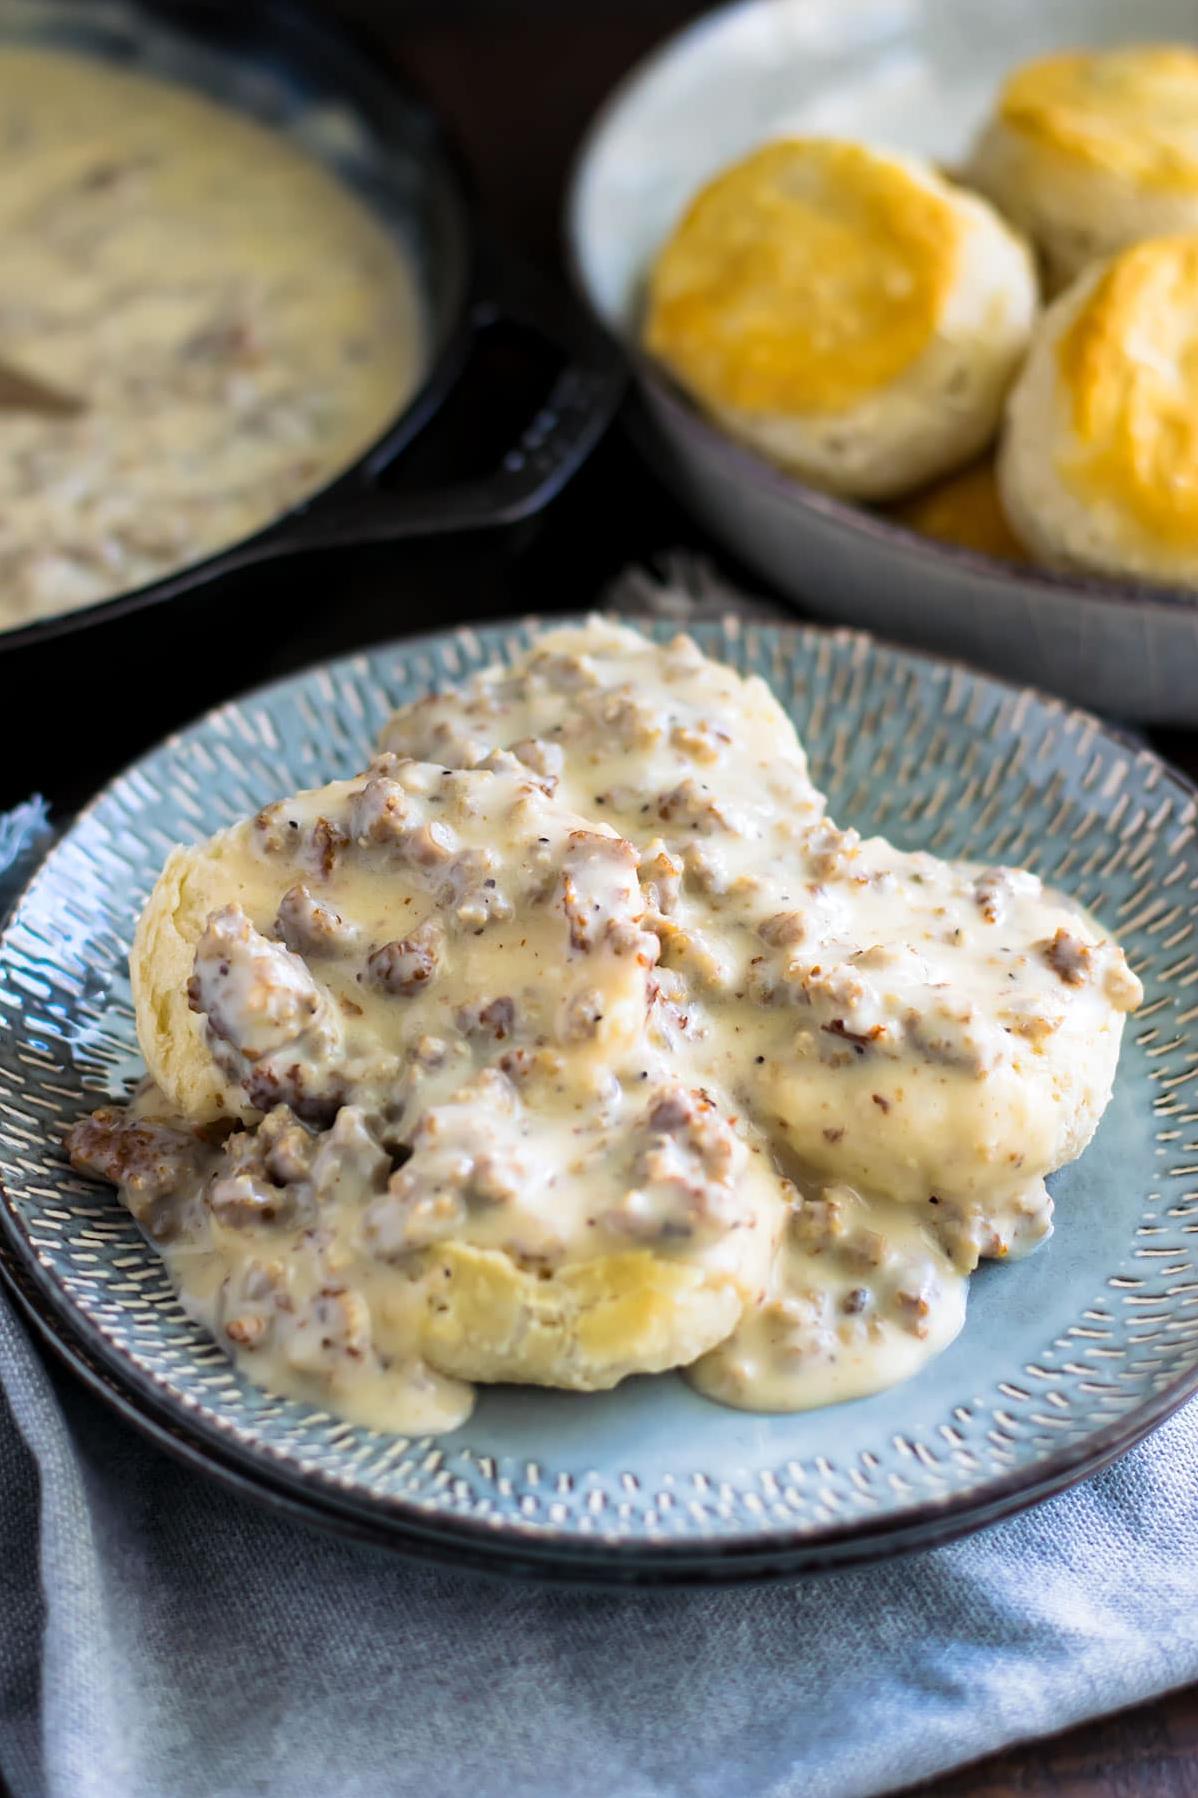  Thick, creamy, and flavorful - this gravy is worth waking up early for!